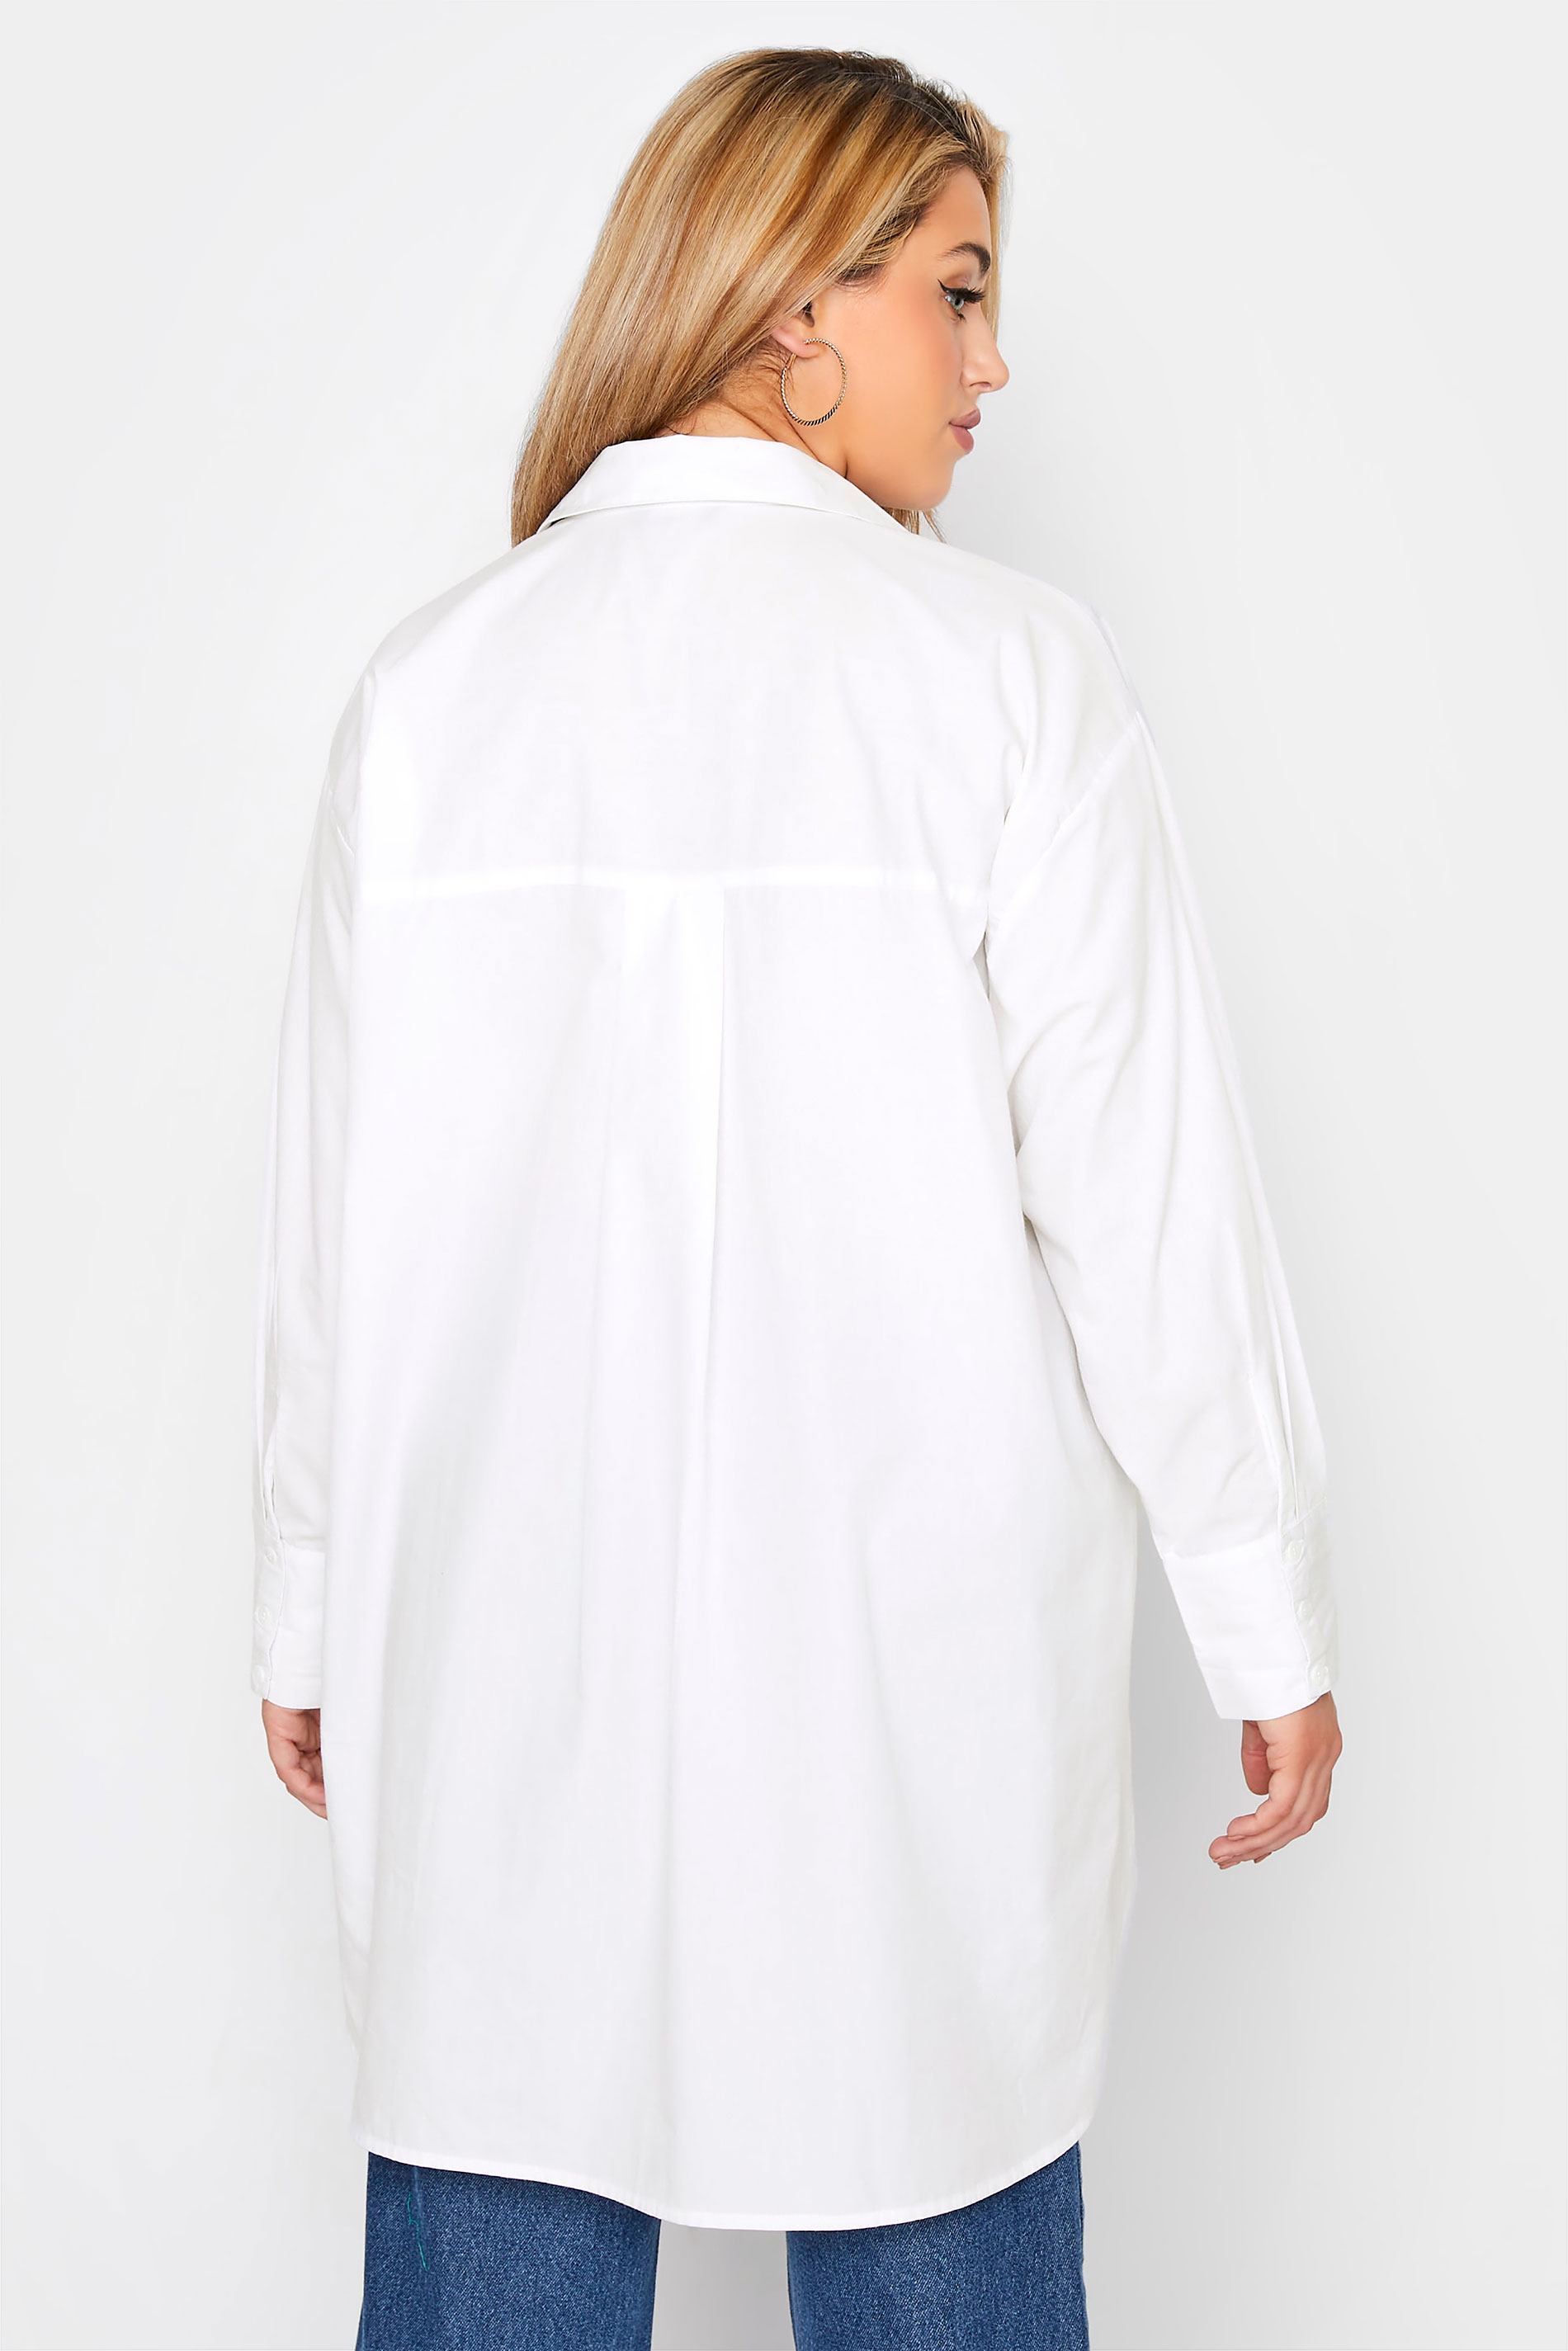 LIMITED COLLECTION Plus Size White Oversized Boyfriend Shirt | Yours Clothing 3